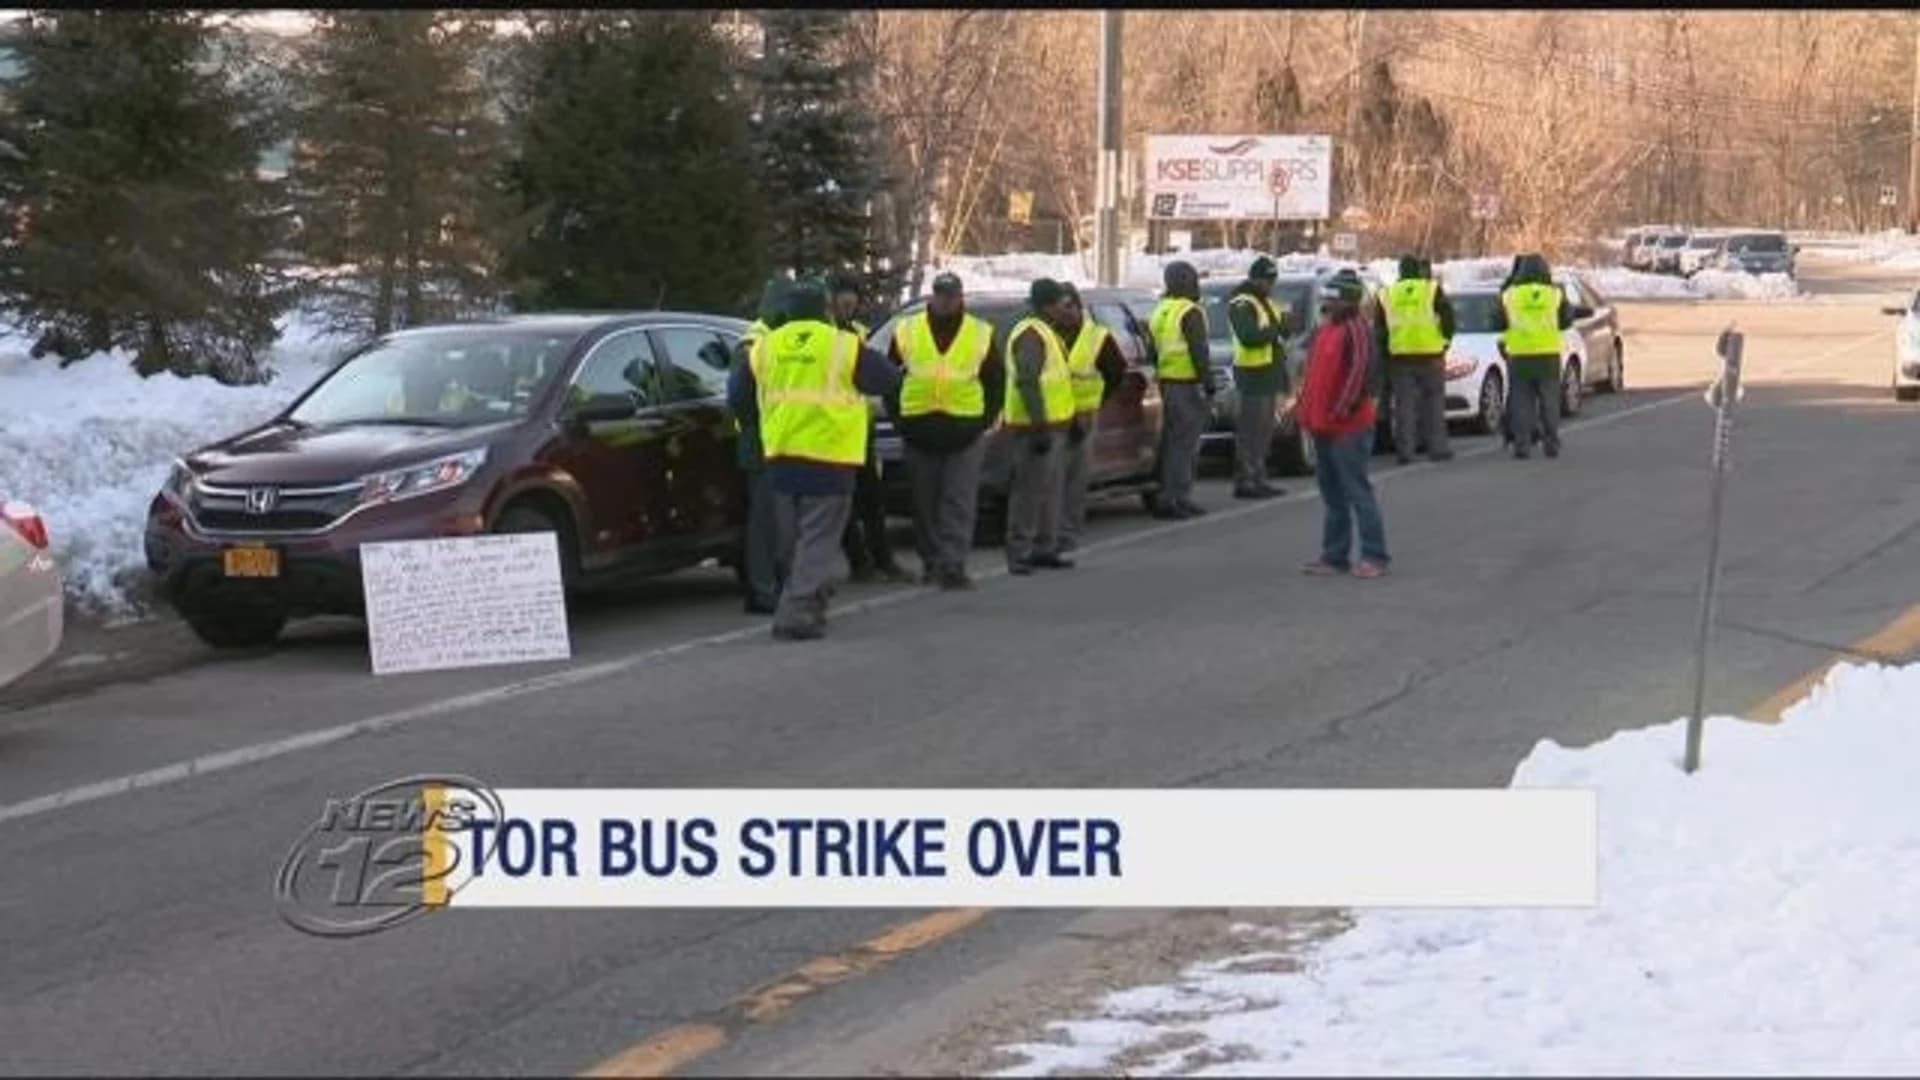 TOR bus service resumes, tentative deal reached to end strike